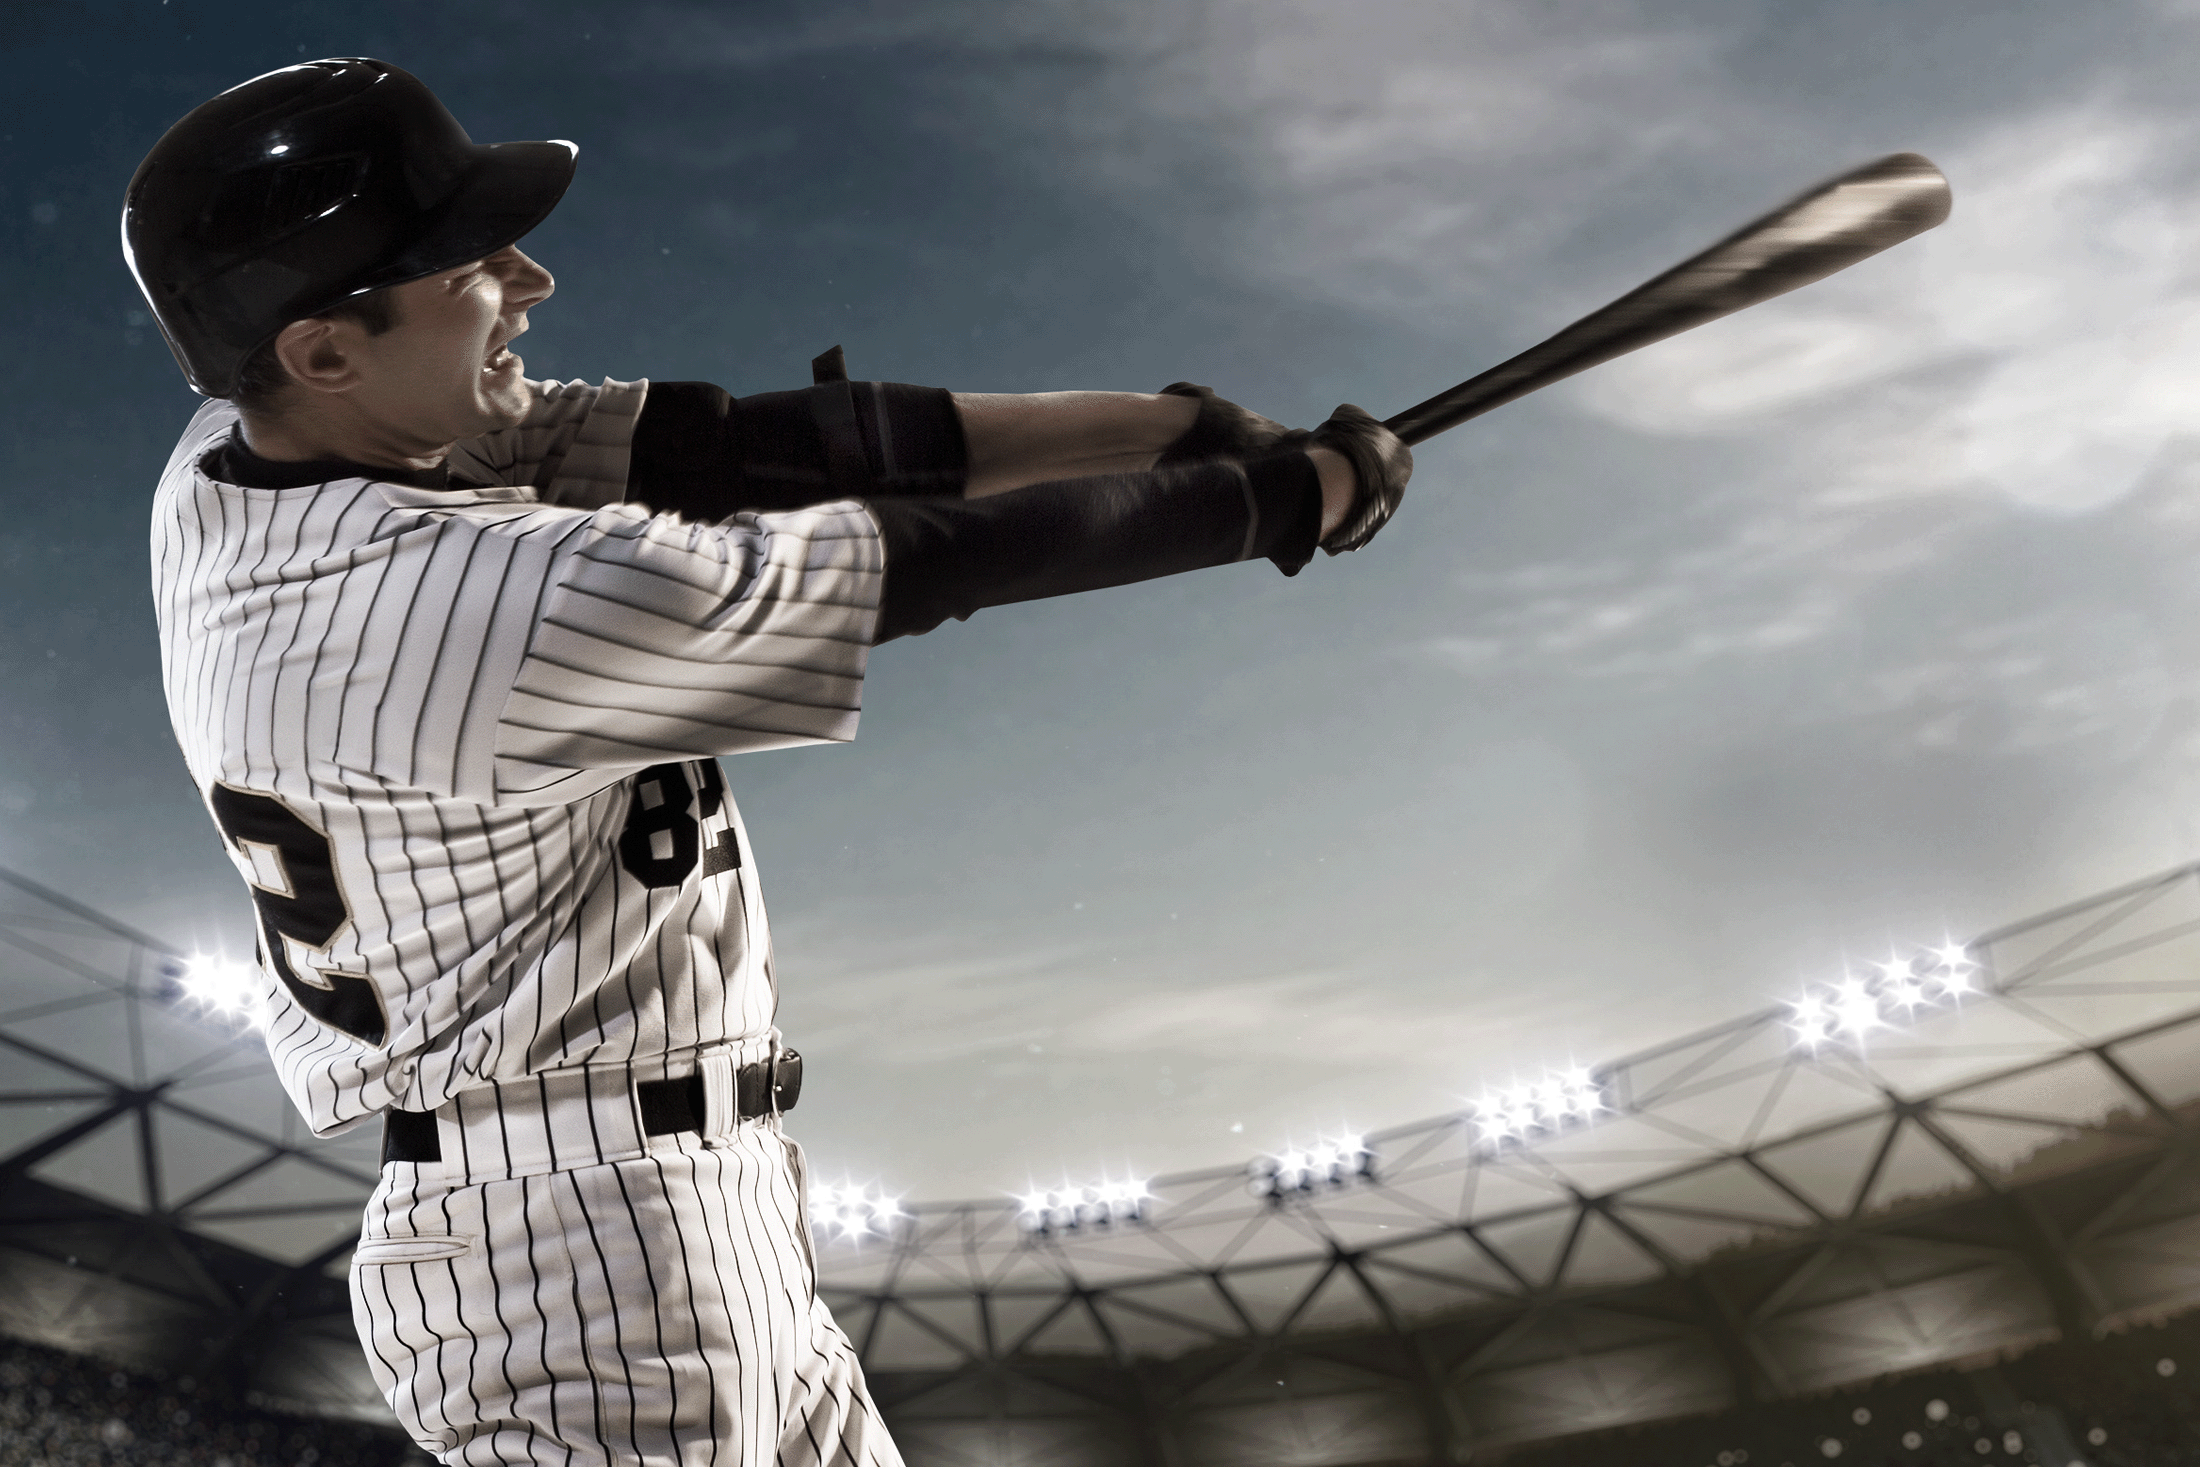 Baseball player swinging for the fences at dusk with the stadium lights shining in the background